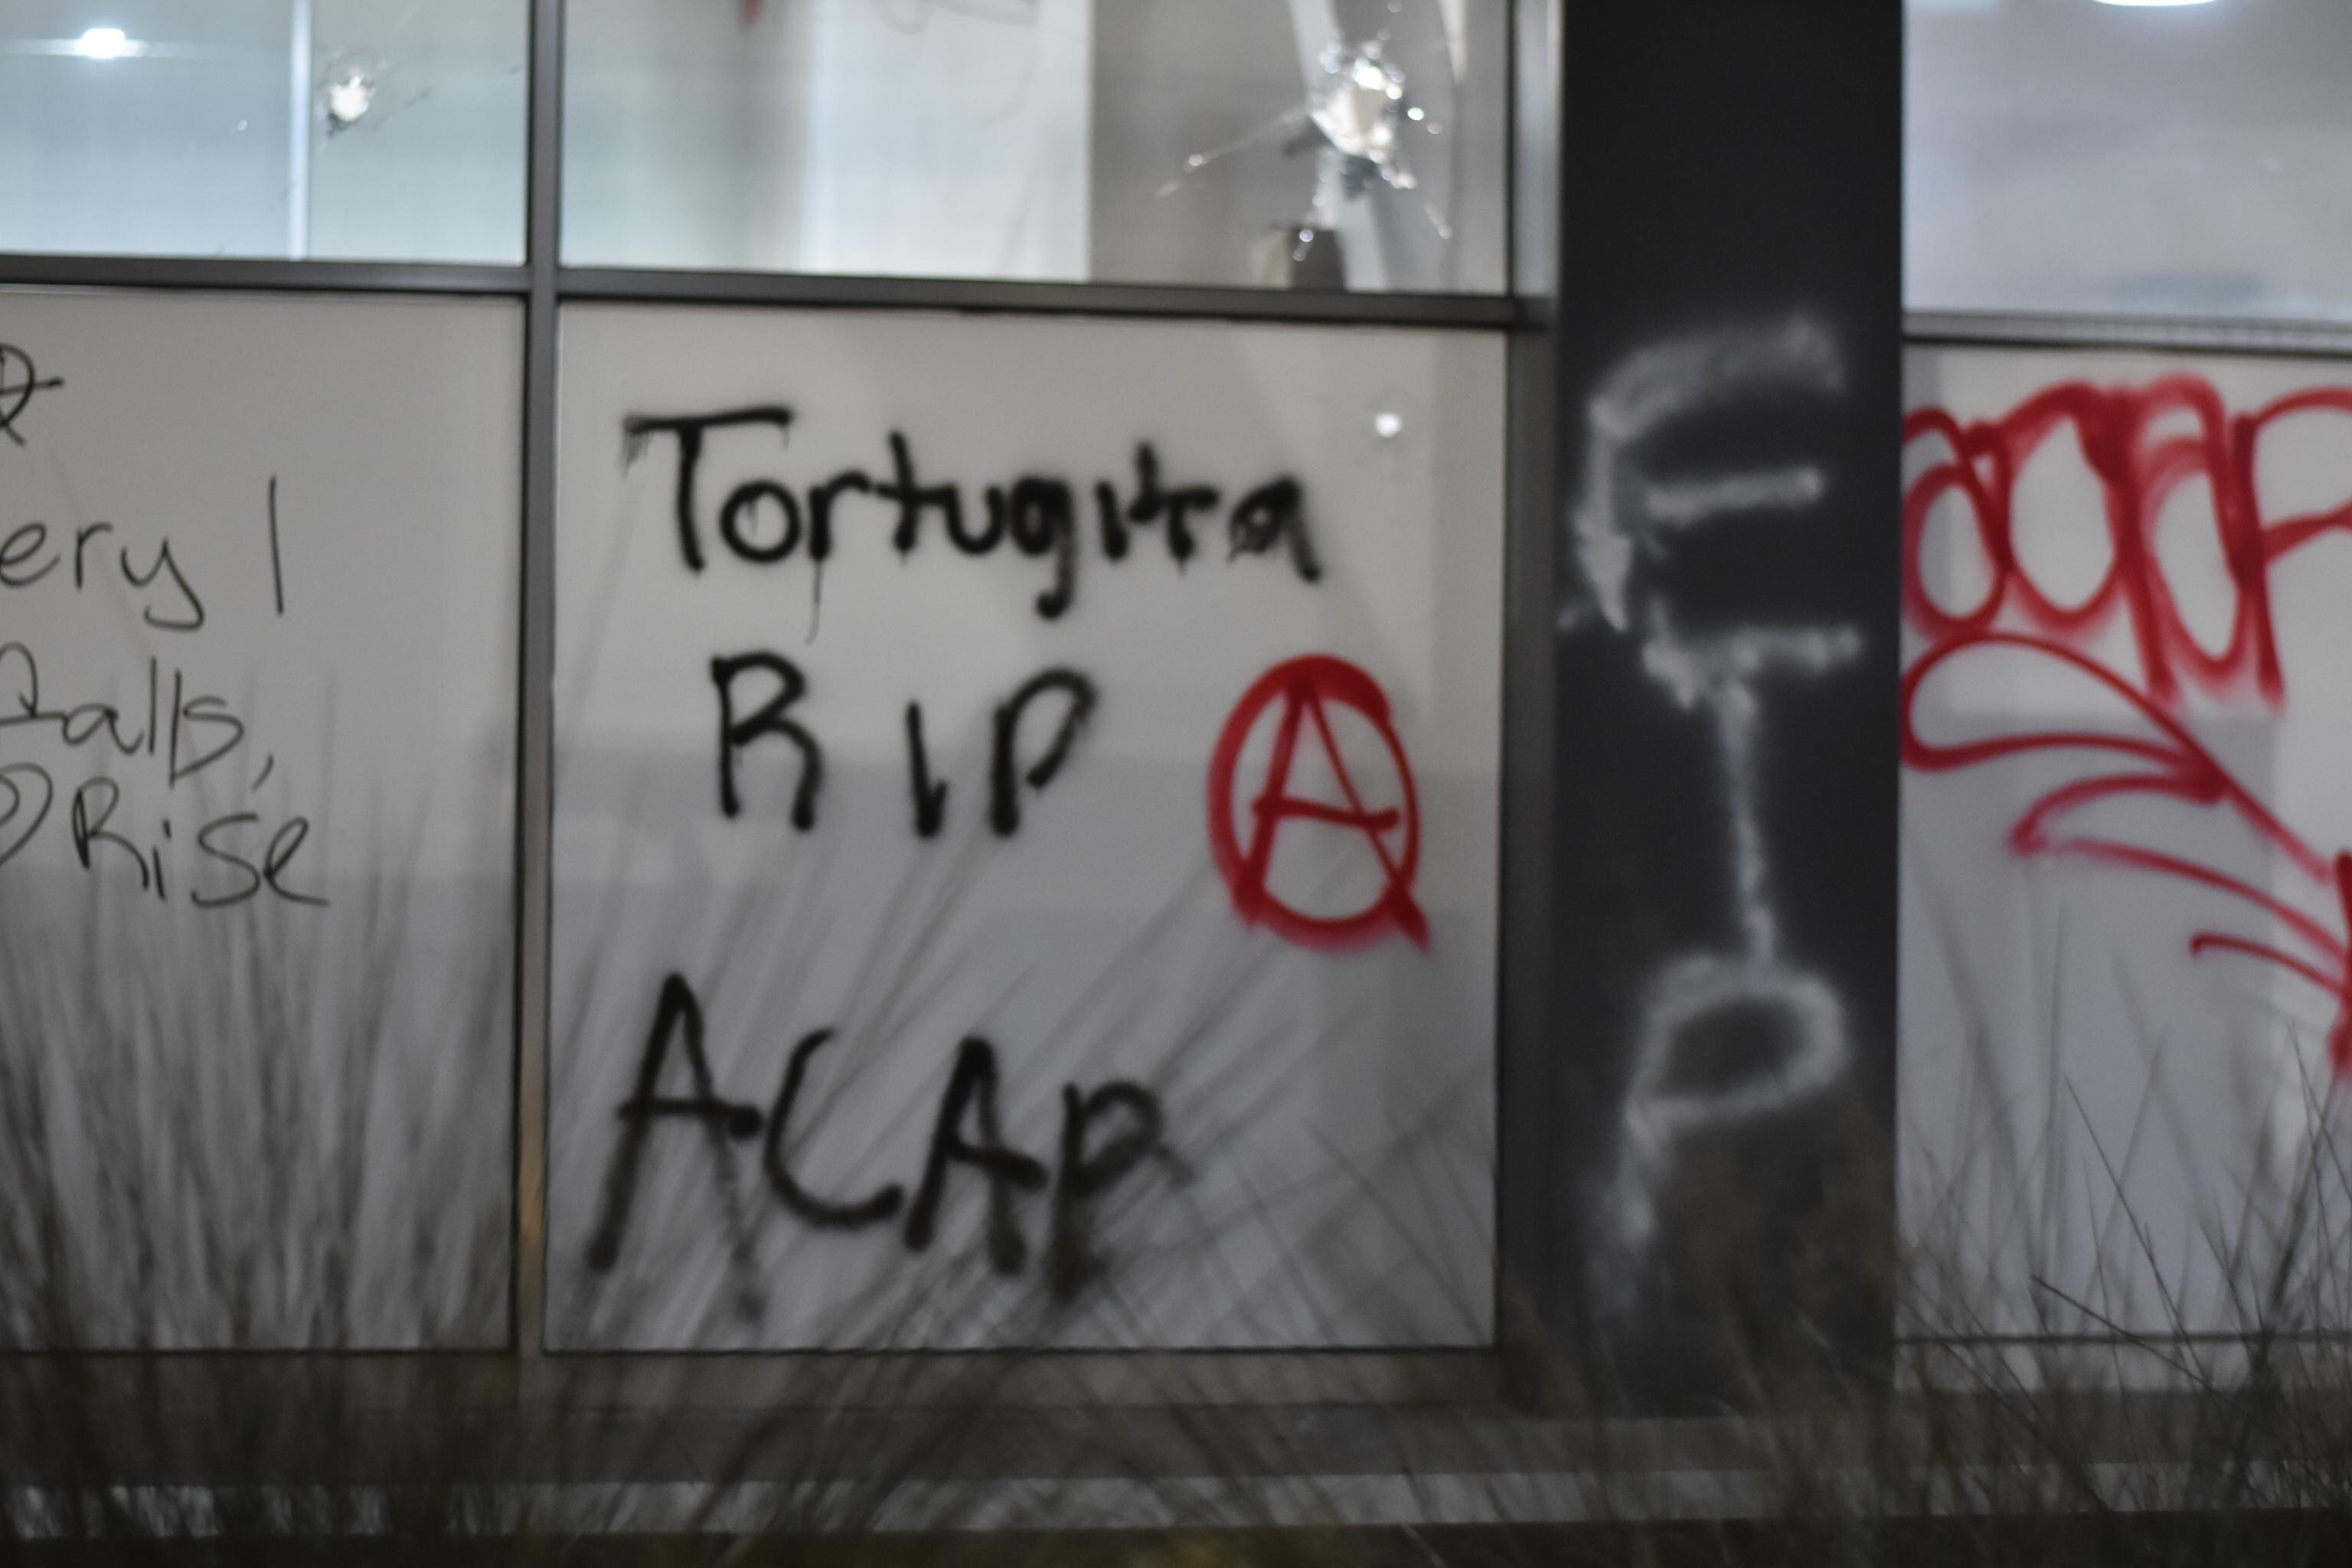 Onto a wall, "Tortuguita RIP" and "ACAB" are tagged in black spray paint. "FTP" is tagged in white spray paint. "ACAB" and an anarchist circle-A symbol are tagged in red spray paint.